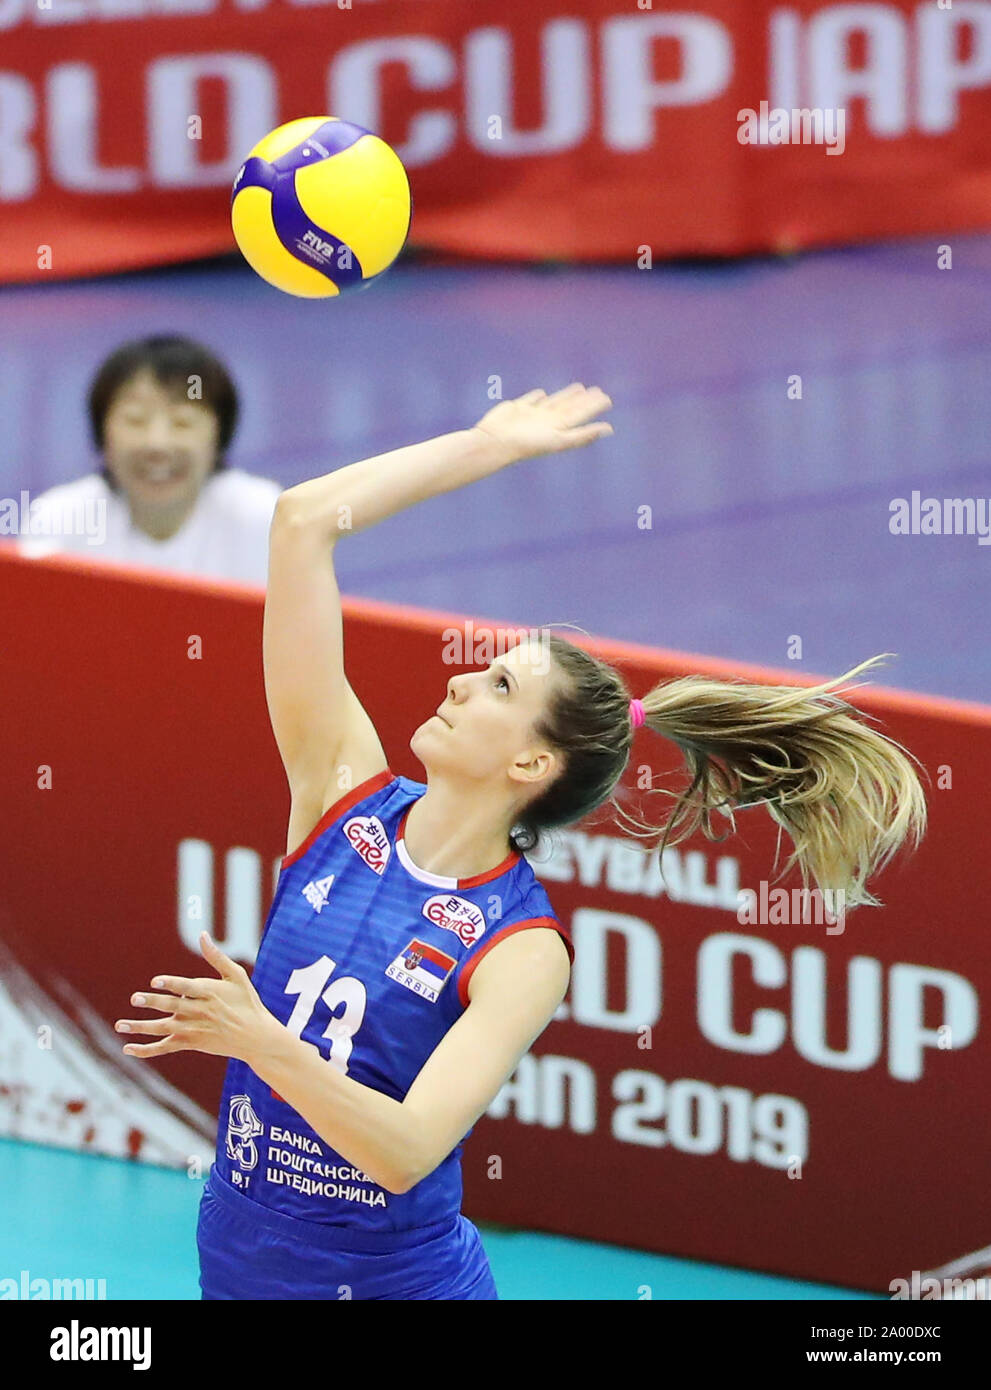 Hamamatsu, Japan. 19th Sep, 2019. Ana Bjelica of Serbia serves during a  round robin match against the Netherlands at the 2019 FIVB Volleyball  Women's World Cup in Hamamatsu, Japan, Sept. 19, 2019.